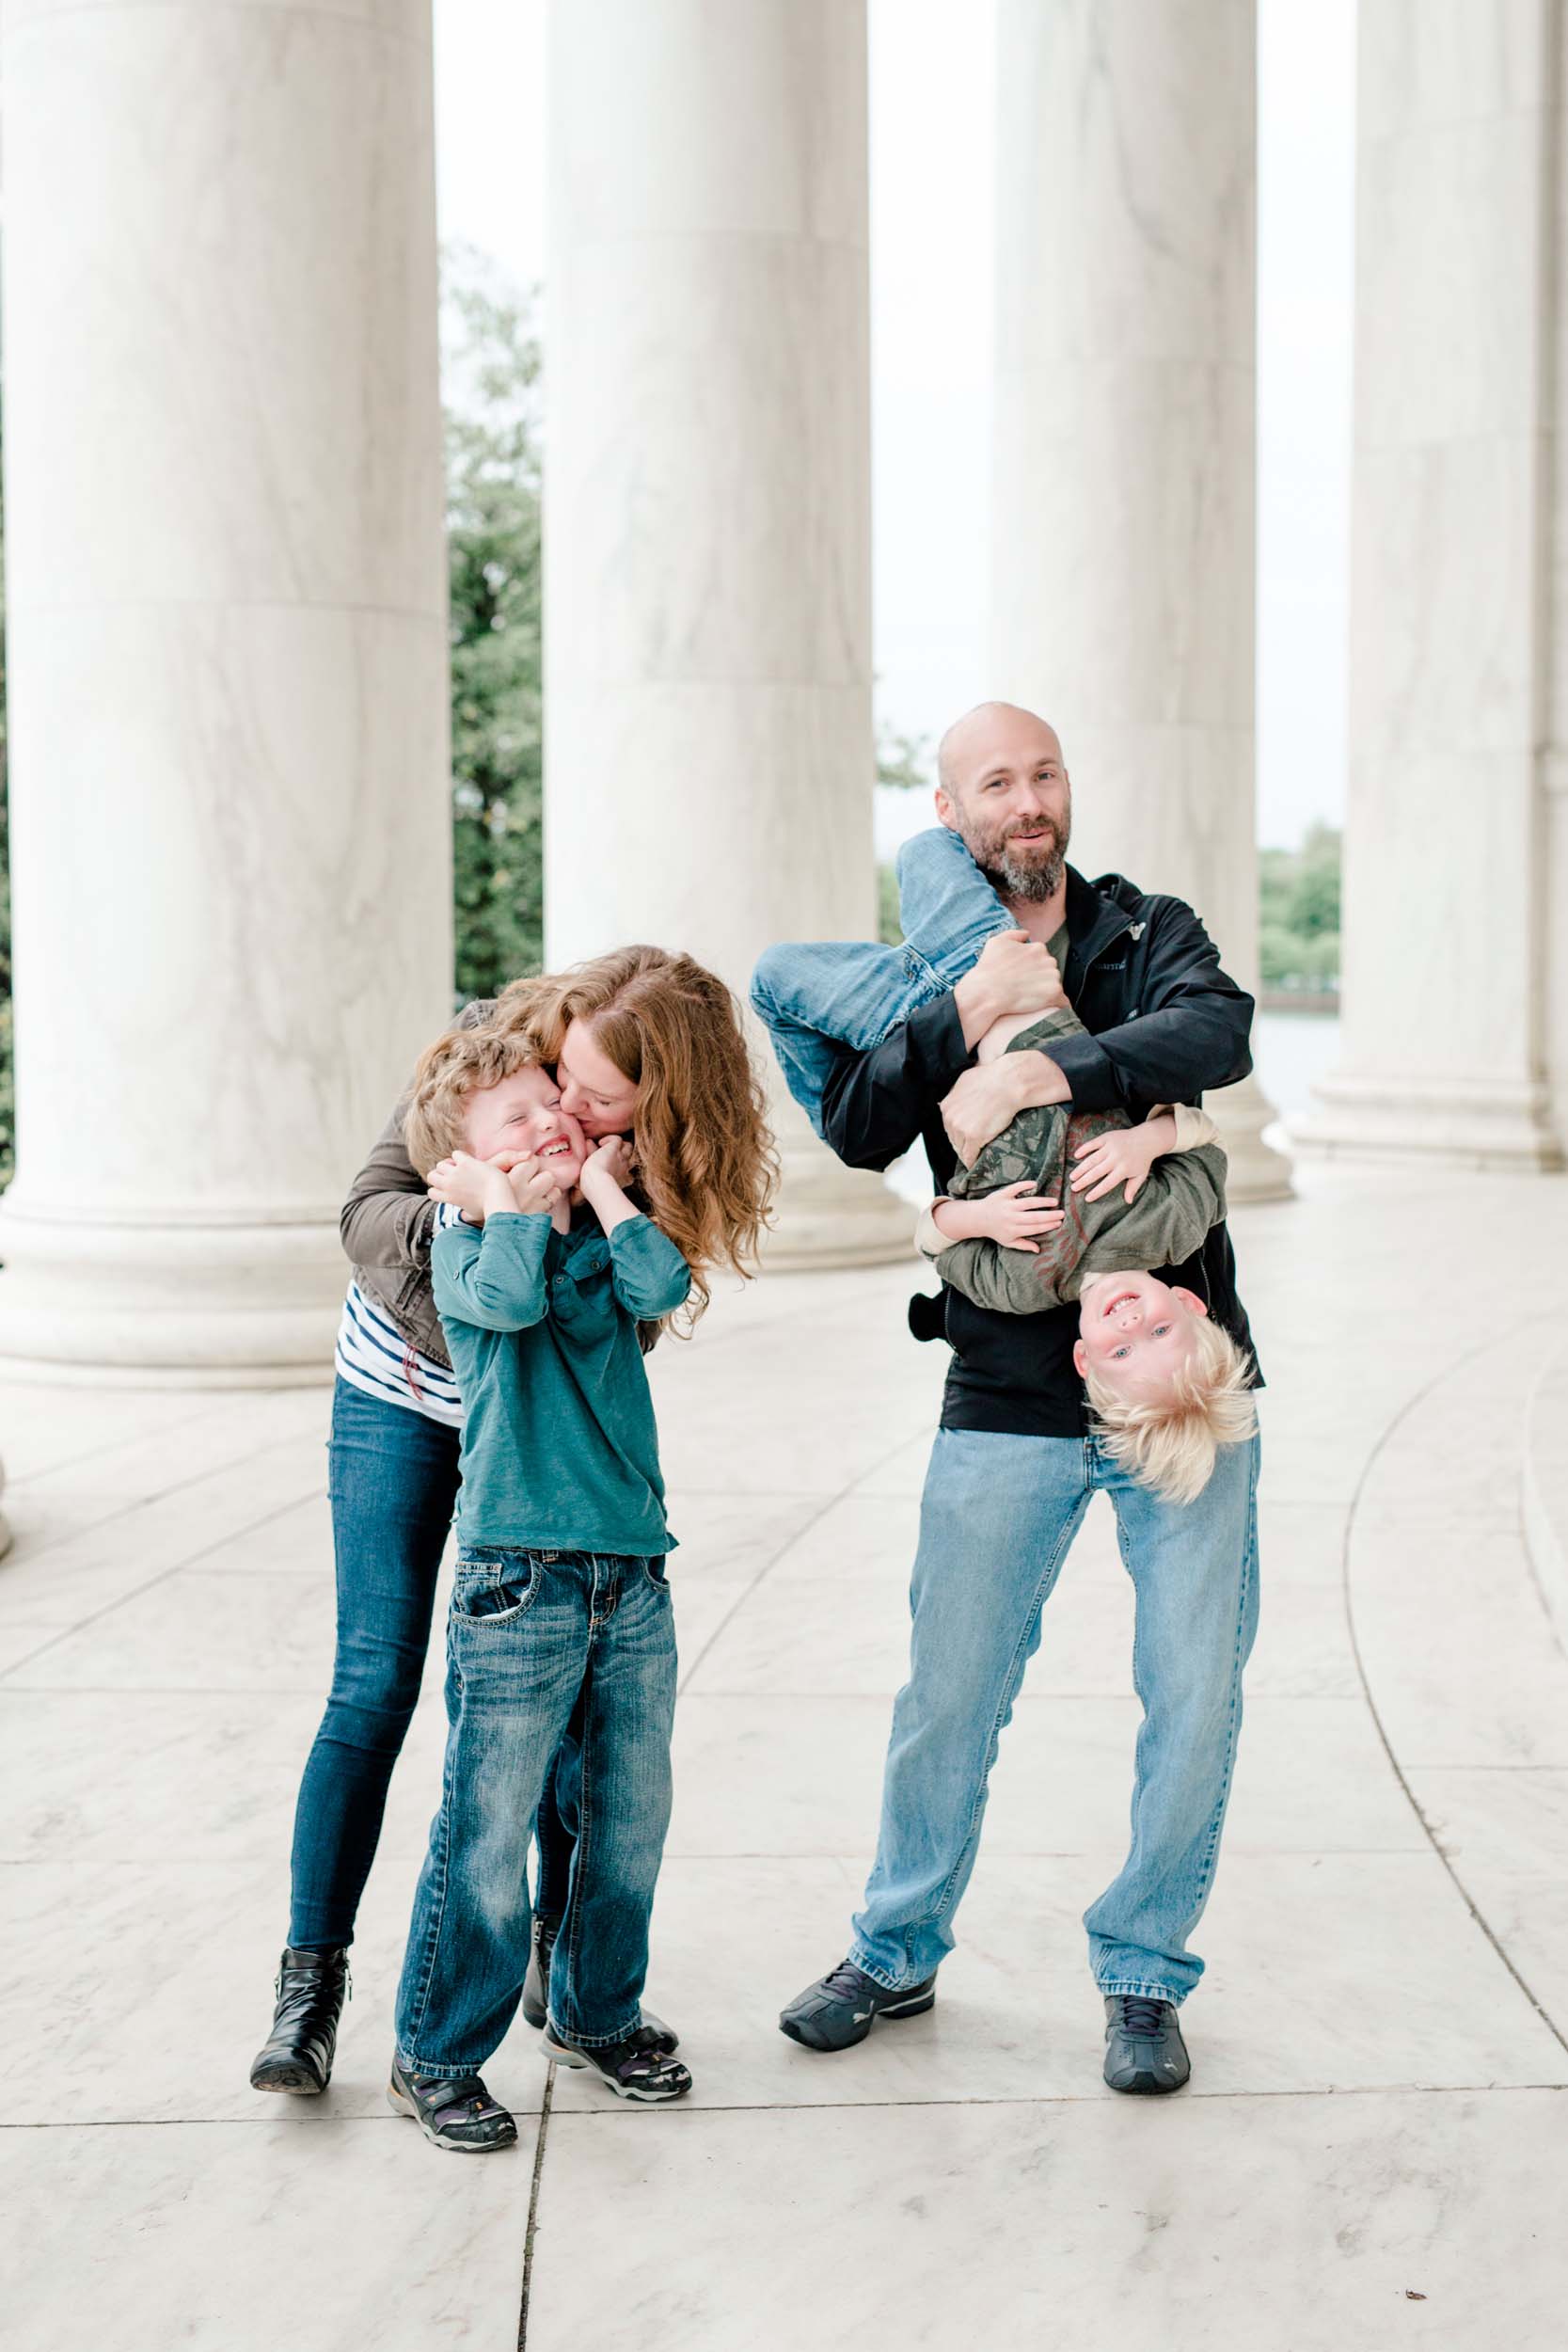 Mom kissing her young son while the father holds their other son on a family trip together in Washington DC, USA